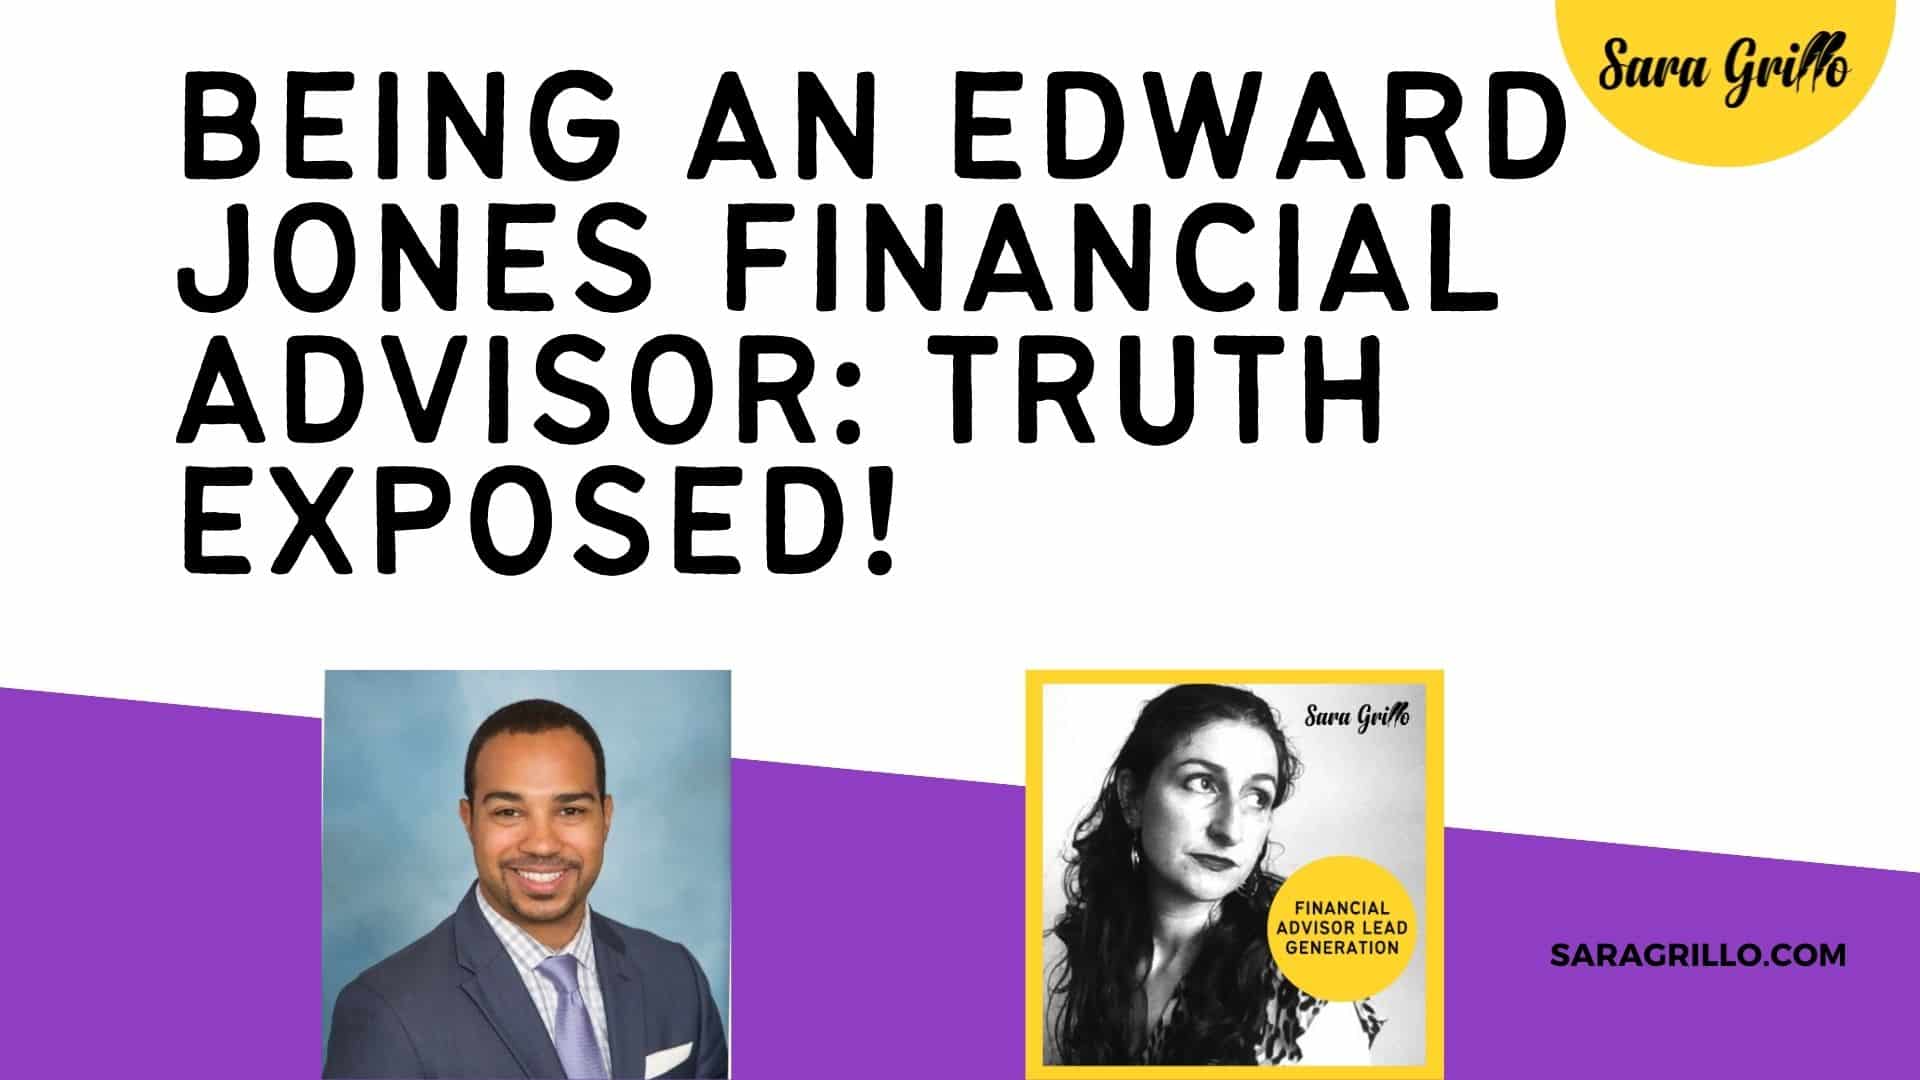 This blog talks about the real experience that somebody had being an Edward Jones financial advisor.